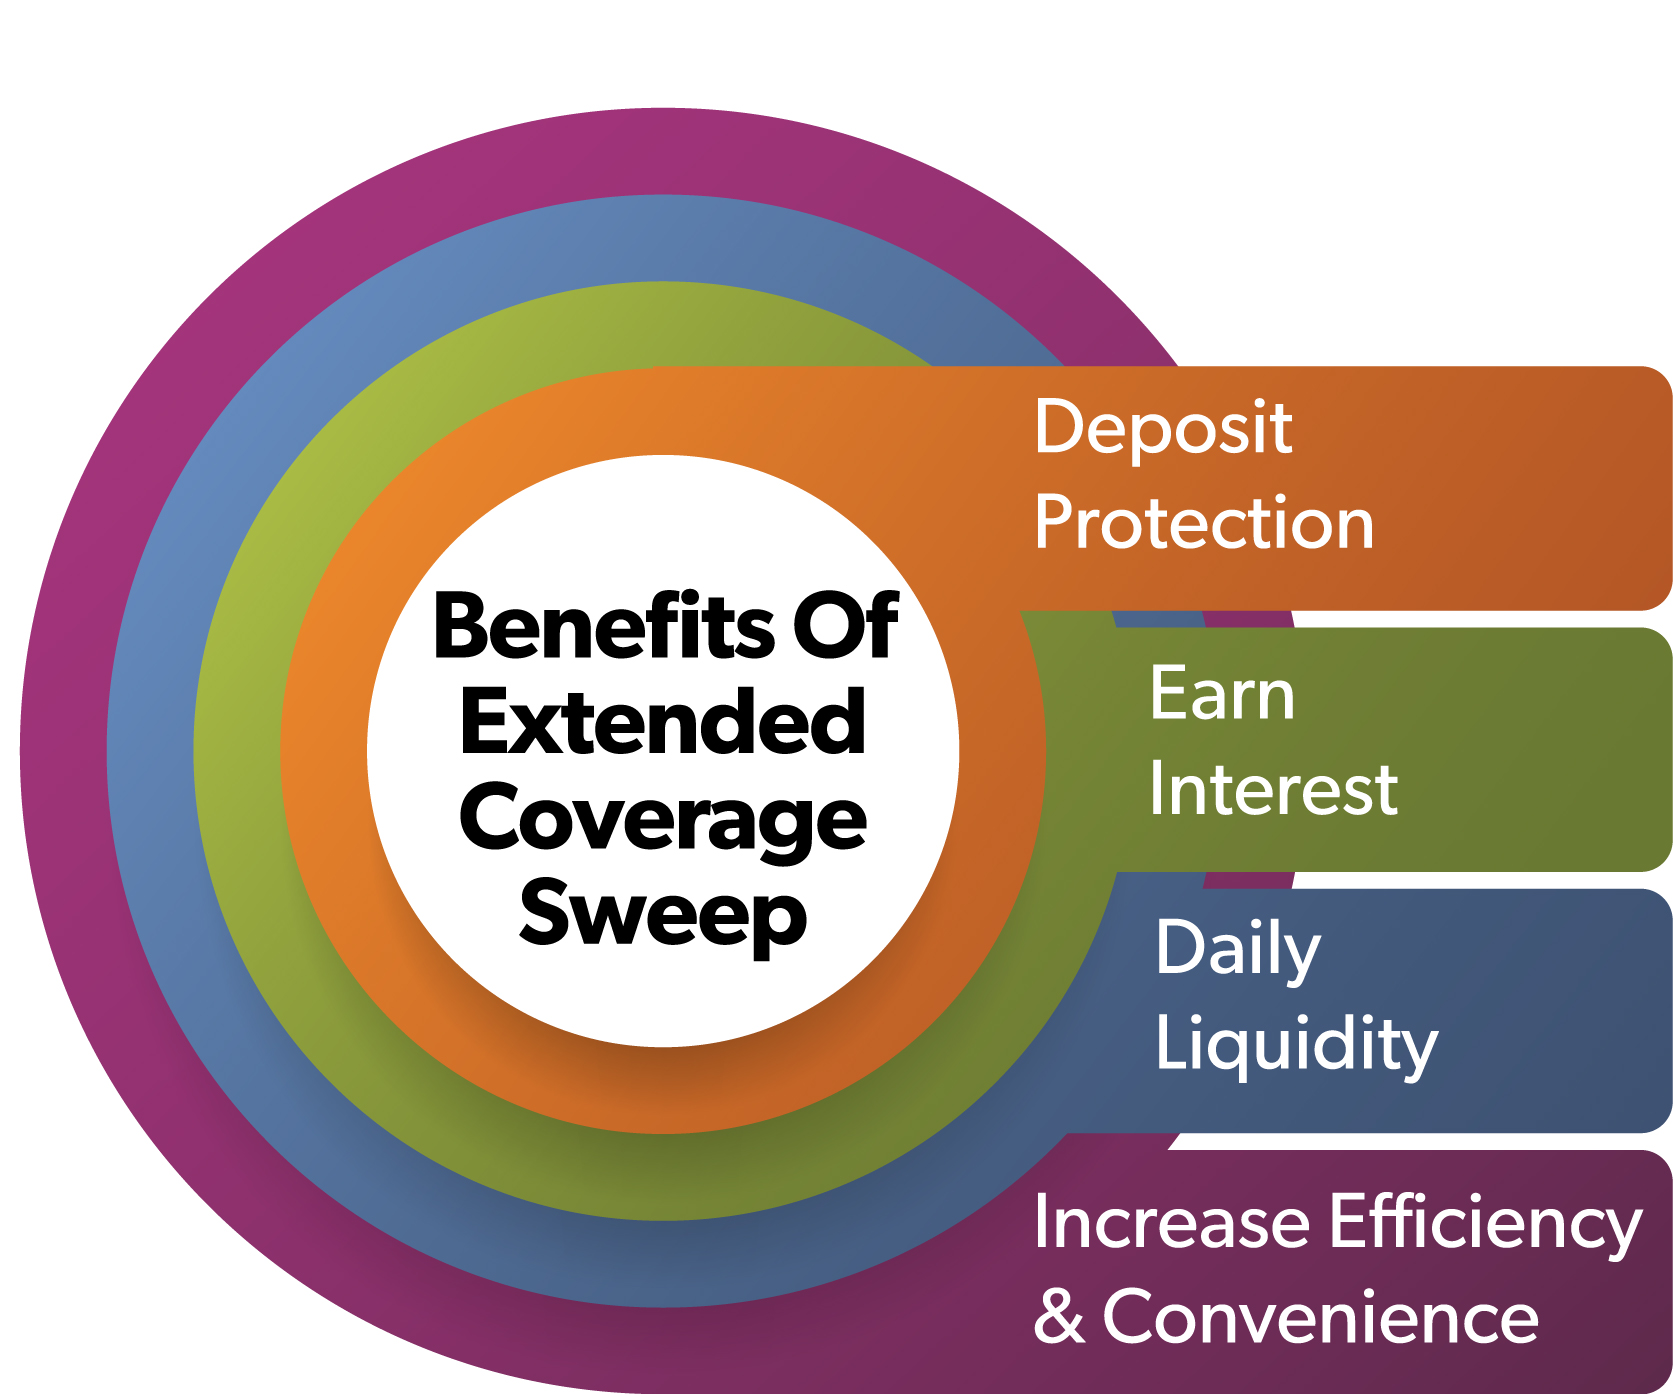 Benefits of Extended Coverage Sweep: Deposit protection, Earn Interest, Daily Liquidity, Increase Efficiency & Convenience